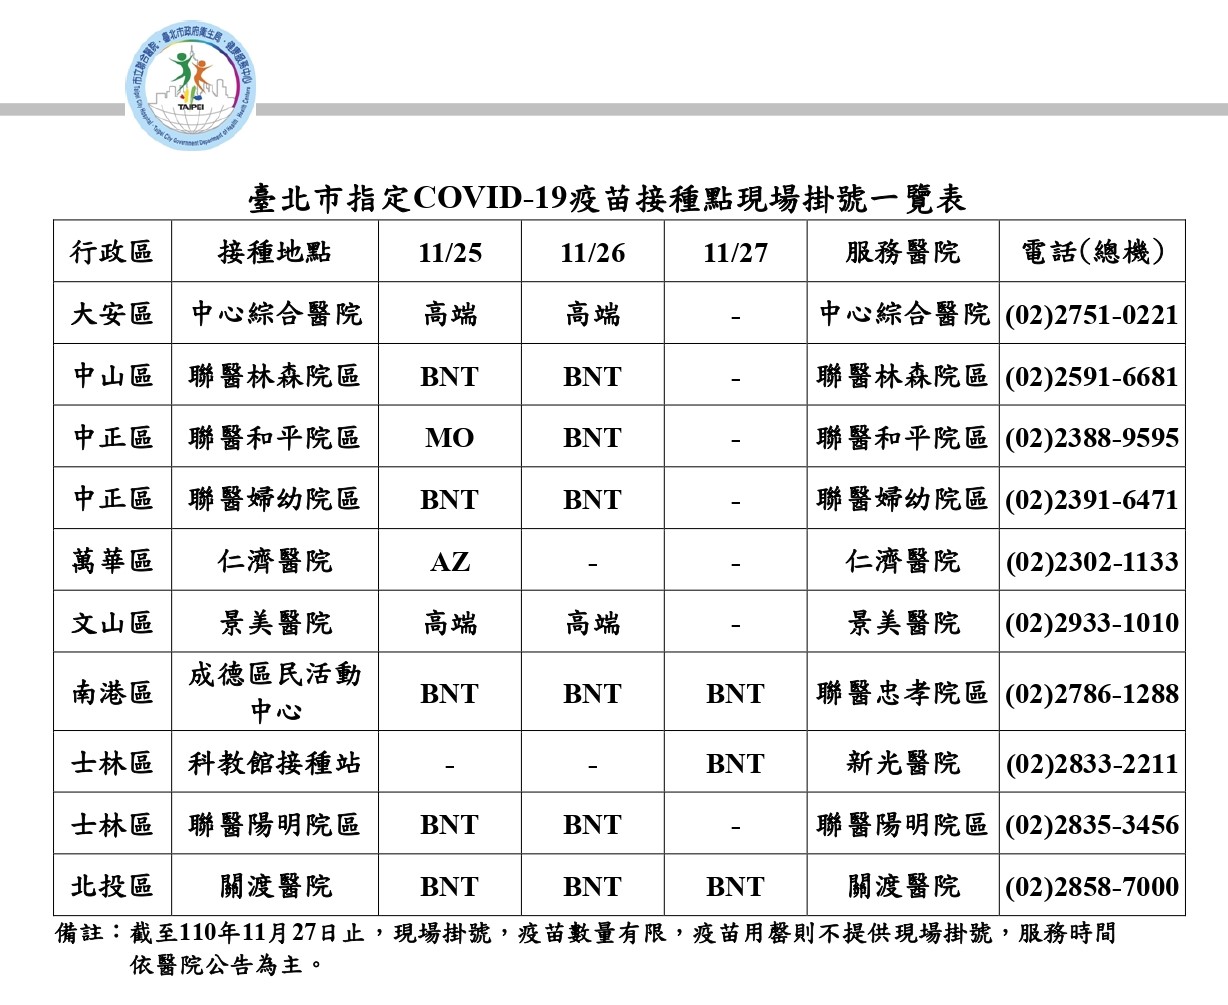 The list of designated clinics for COVID-19 vaccinations. The related services are available until November 27. (Photo / Provided by the Taipei City Government)